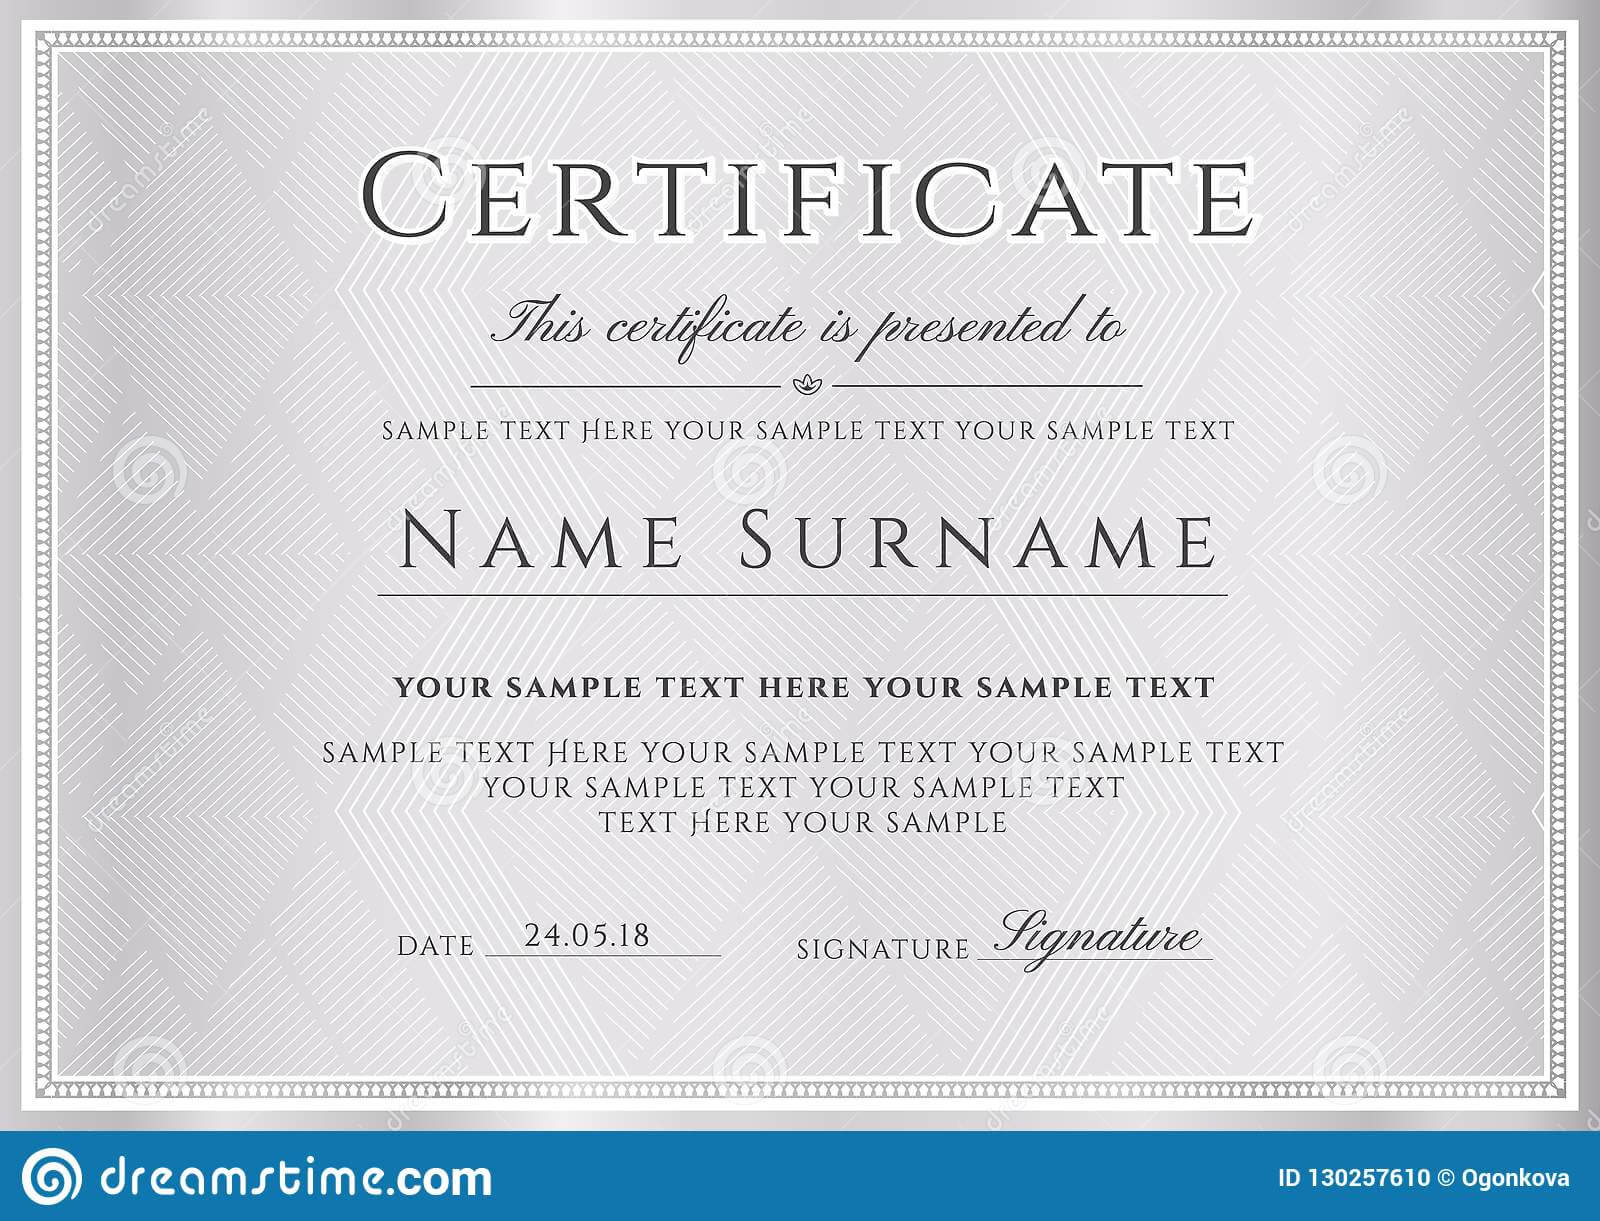 Certificate Vector Template. Formal Silver Border Geometric With Formal Certificate Of Appreciation Template